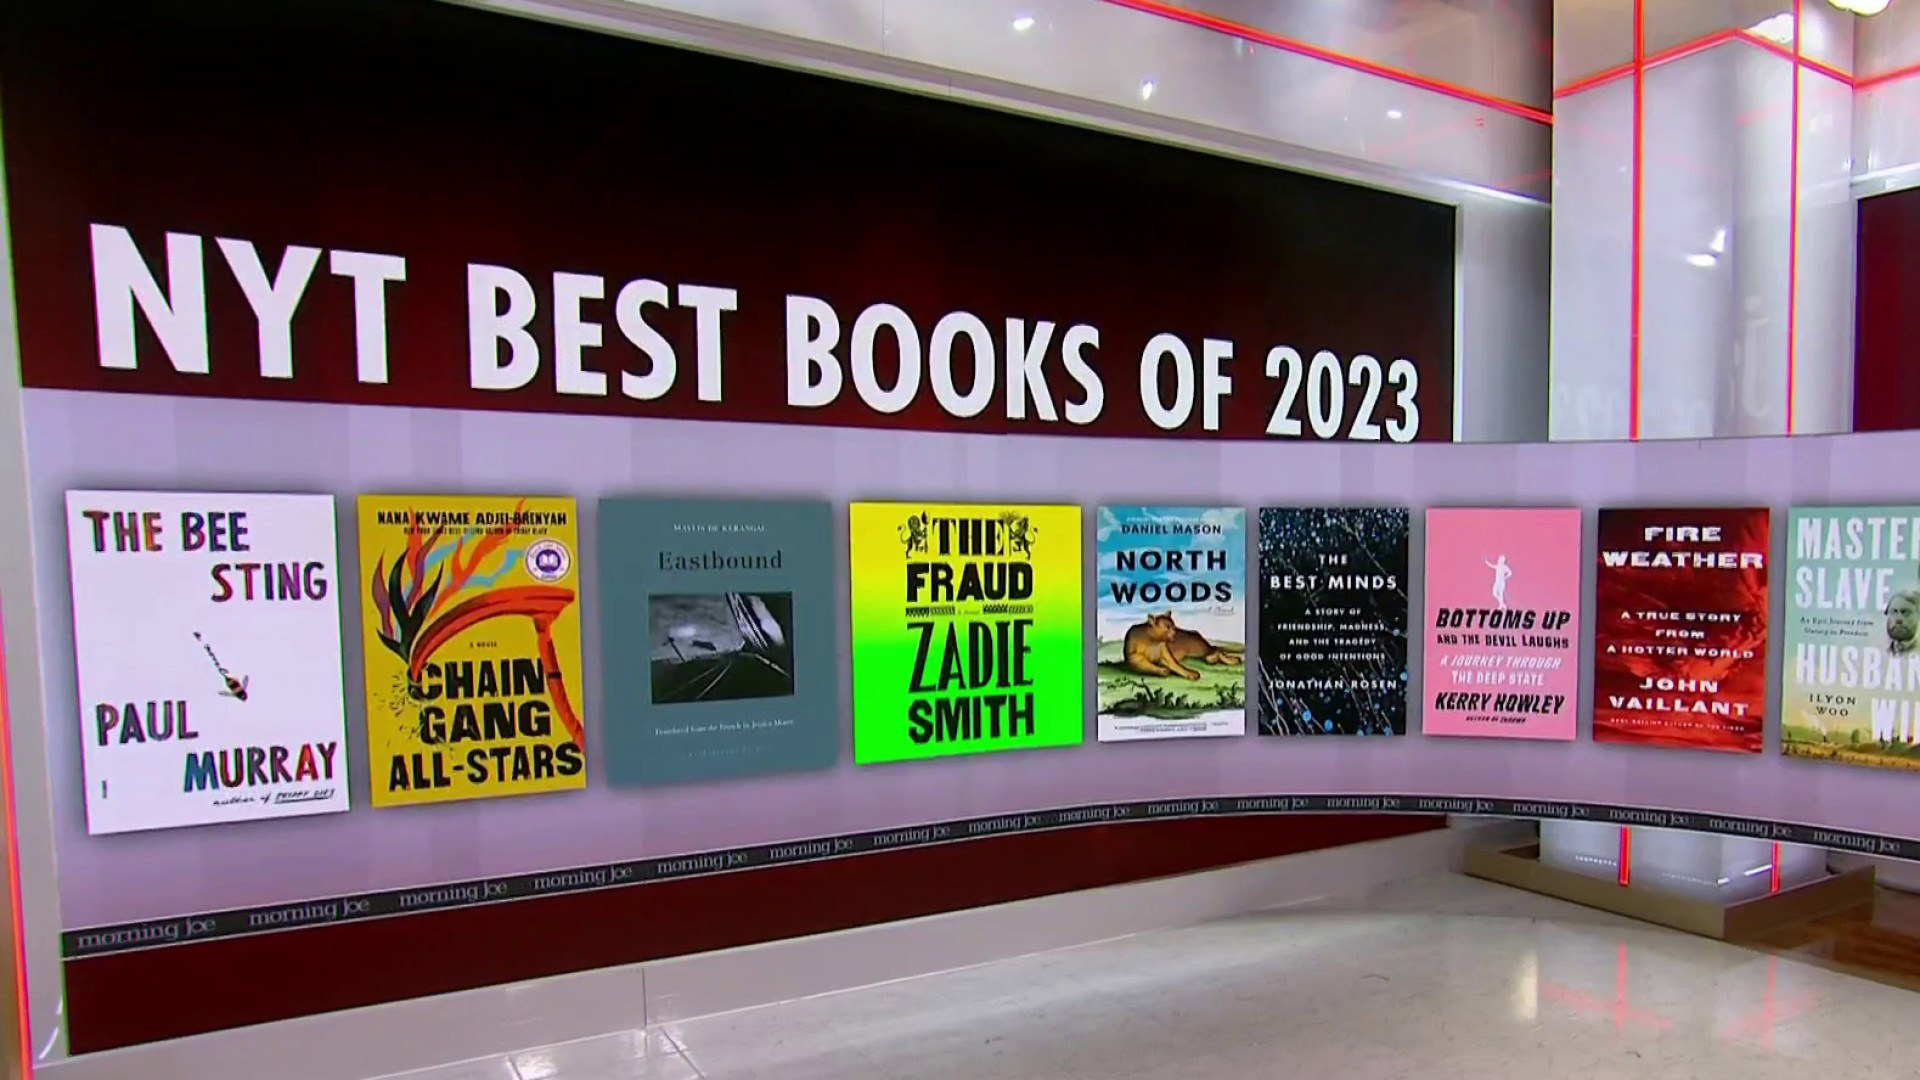 The New York Times reveals 'The 10 Best Books of 2023'